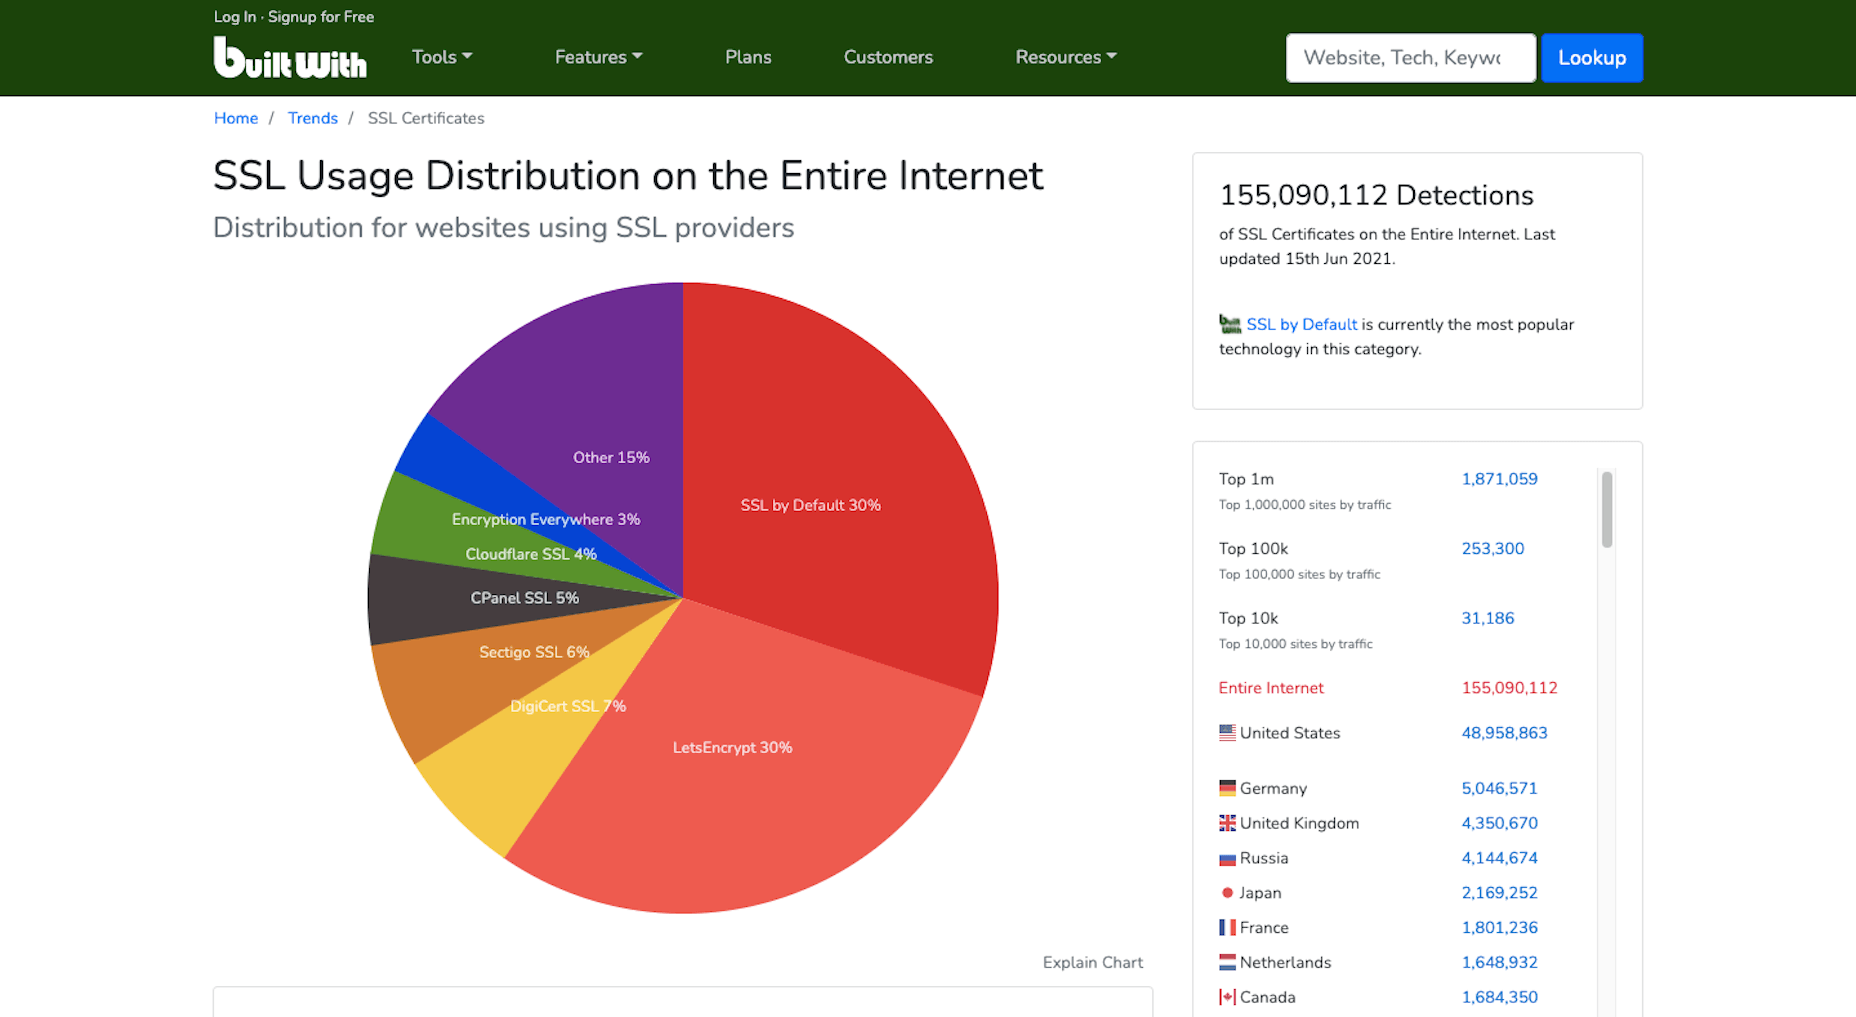 Number of websites with SSL certificate according to BuiltWith